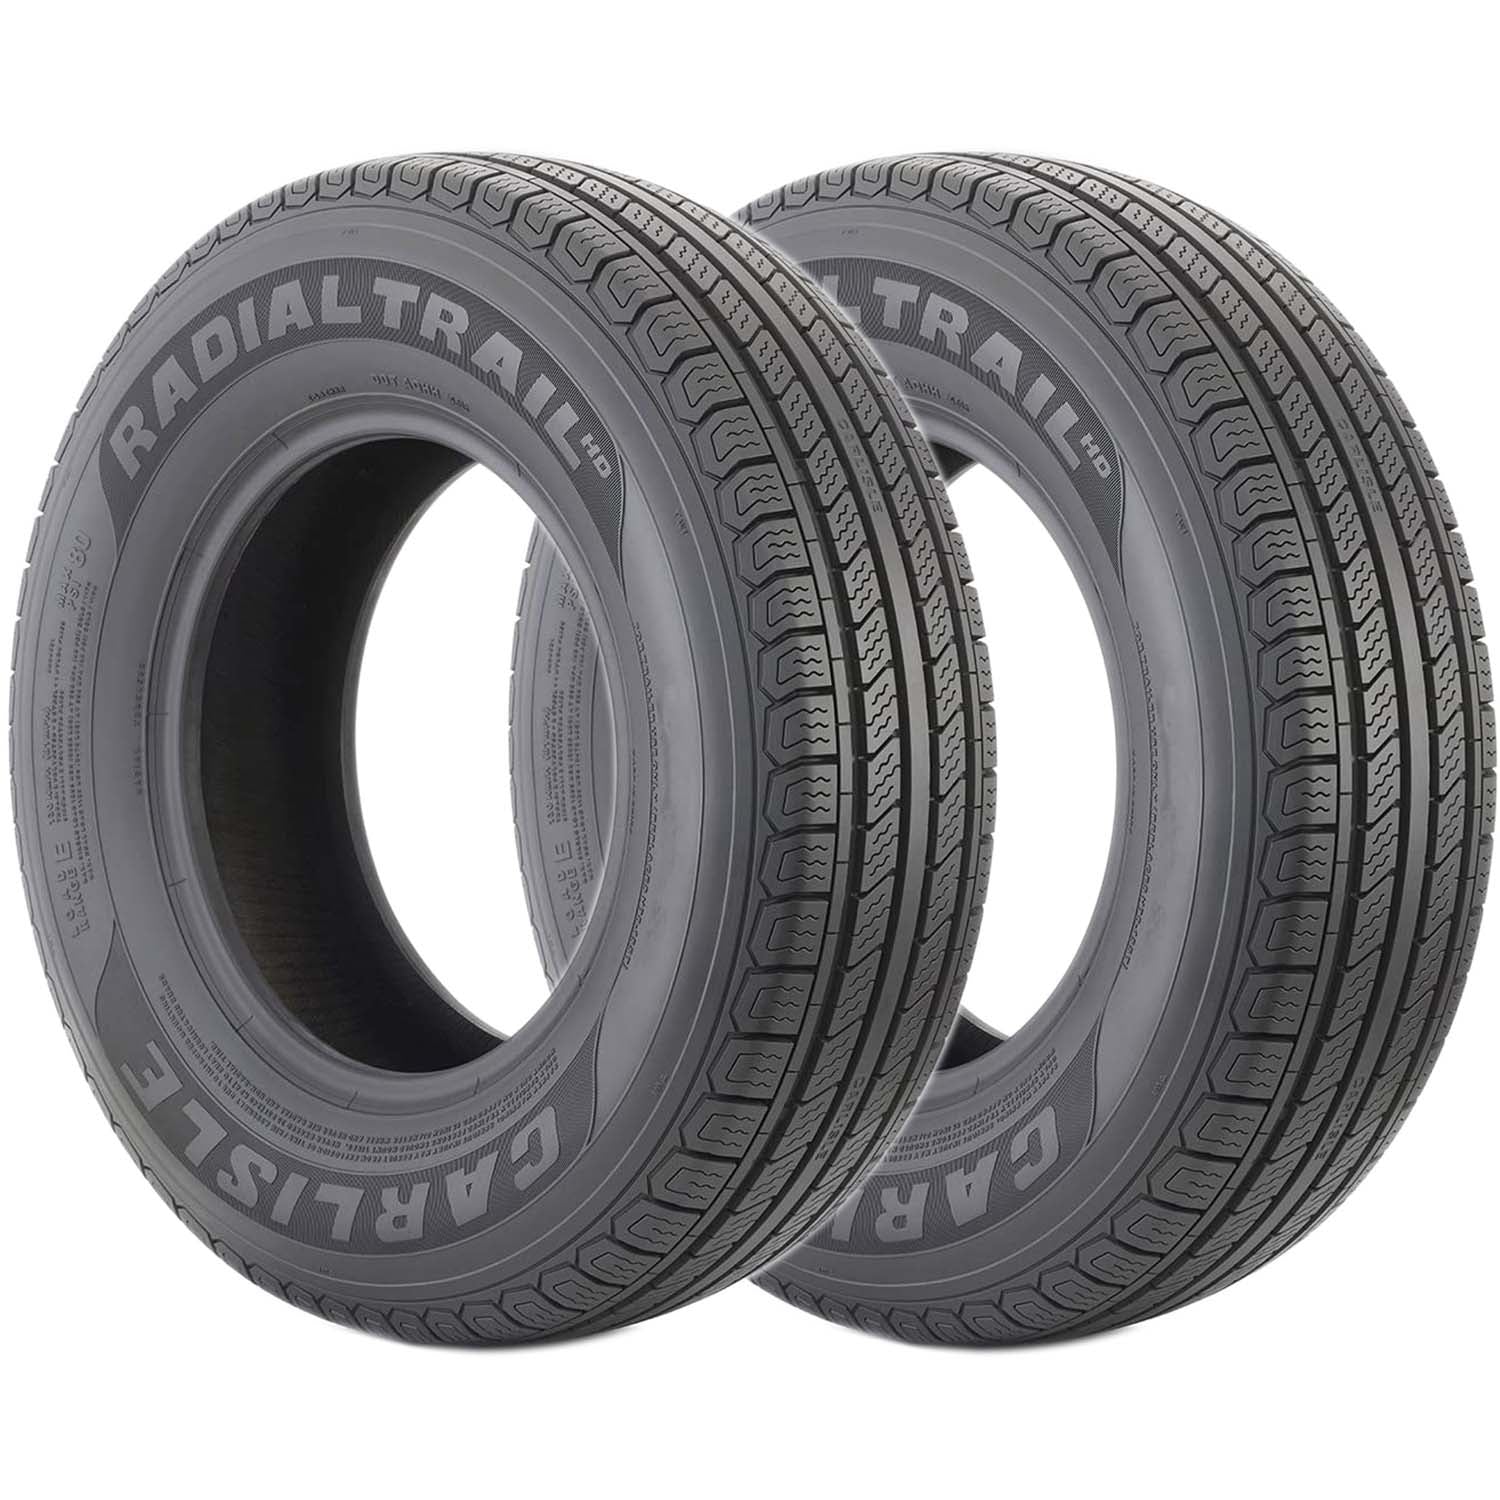 Carlisle Radial Trail HD Trailer Tire LRC 6ply ST215/75R14 Pack of 2